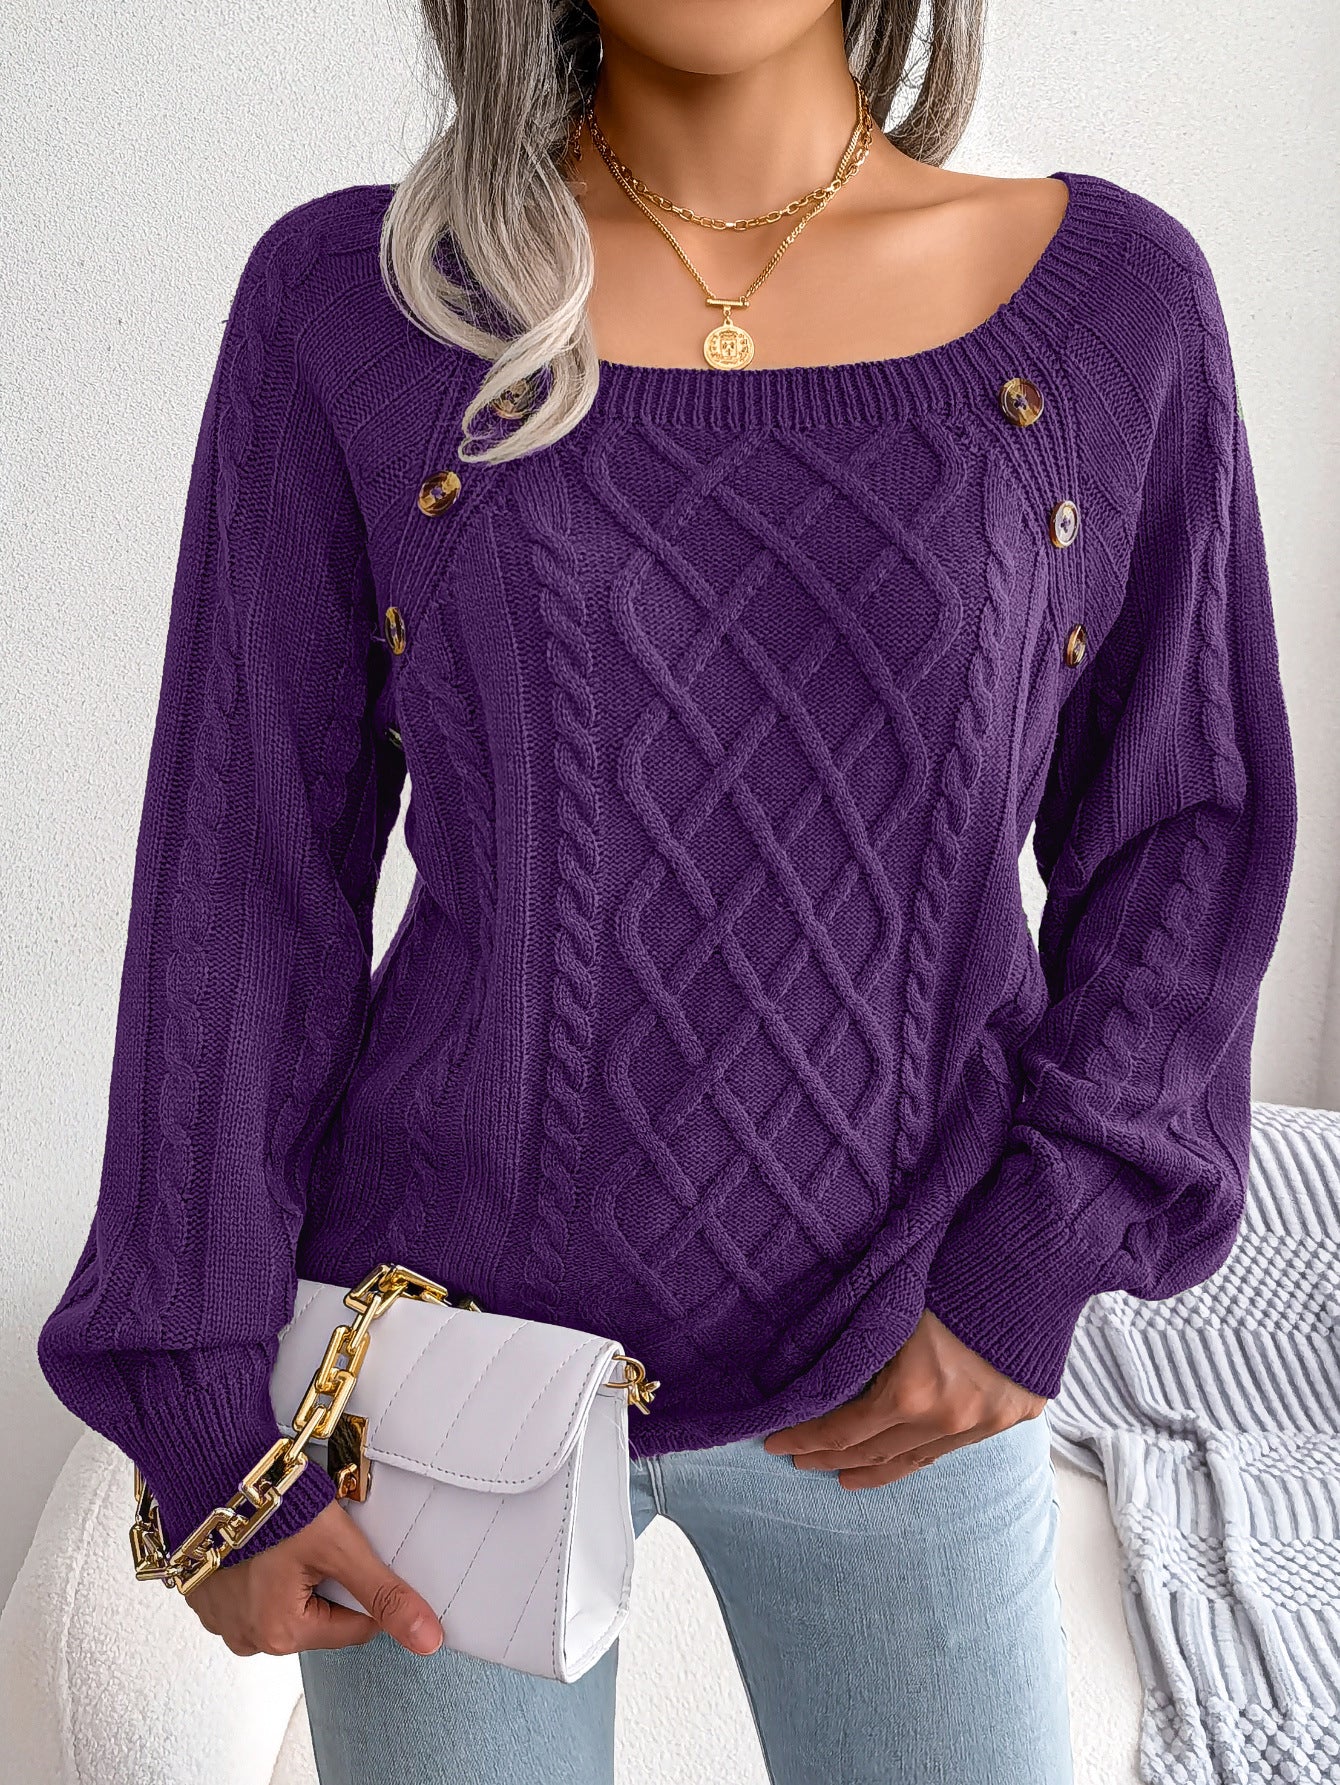 Square Neck Button Twist Knitting Sweater